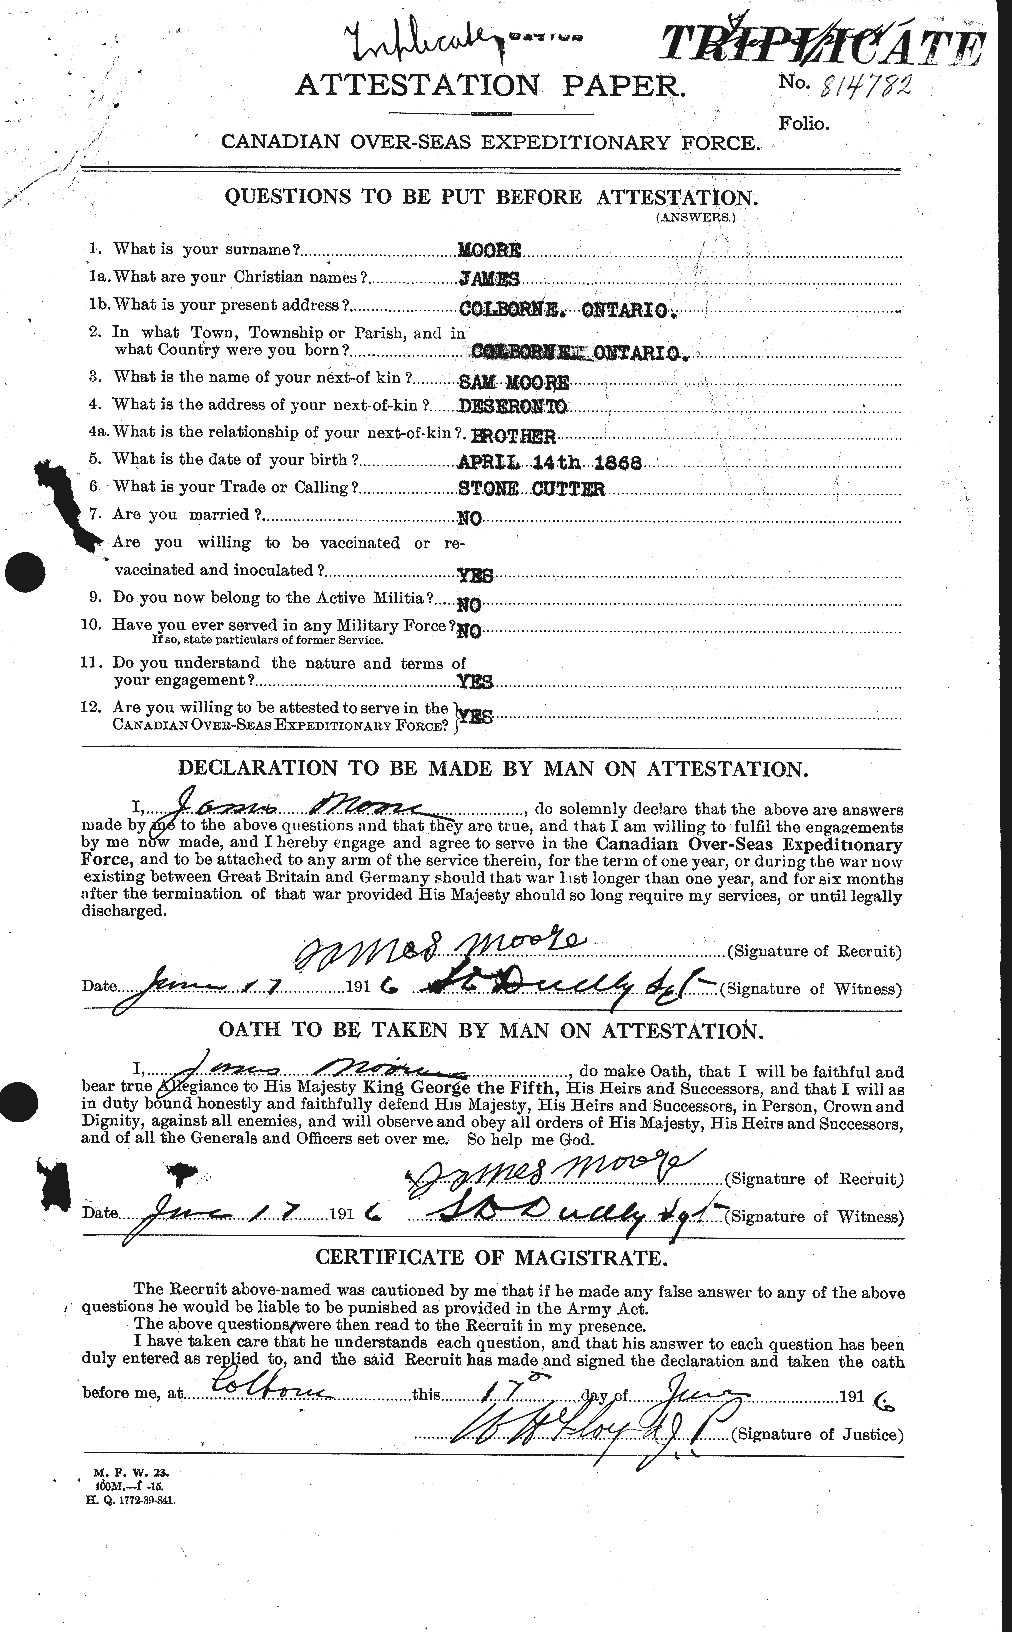 Personnel Records of the First World War - CEF 502192a